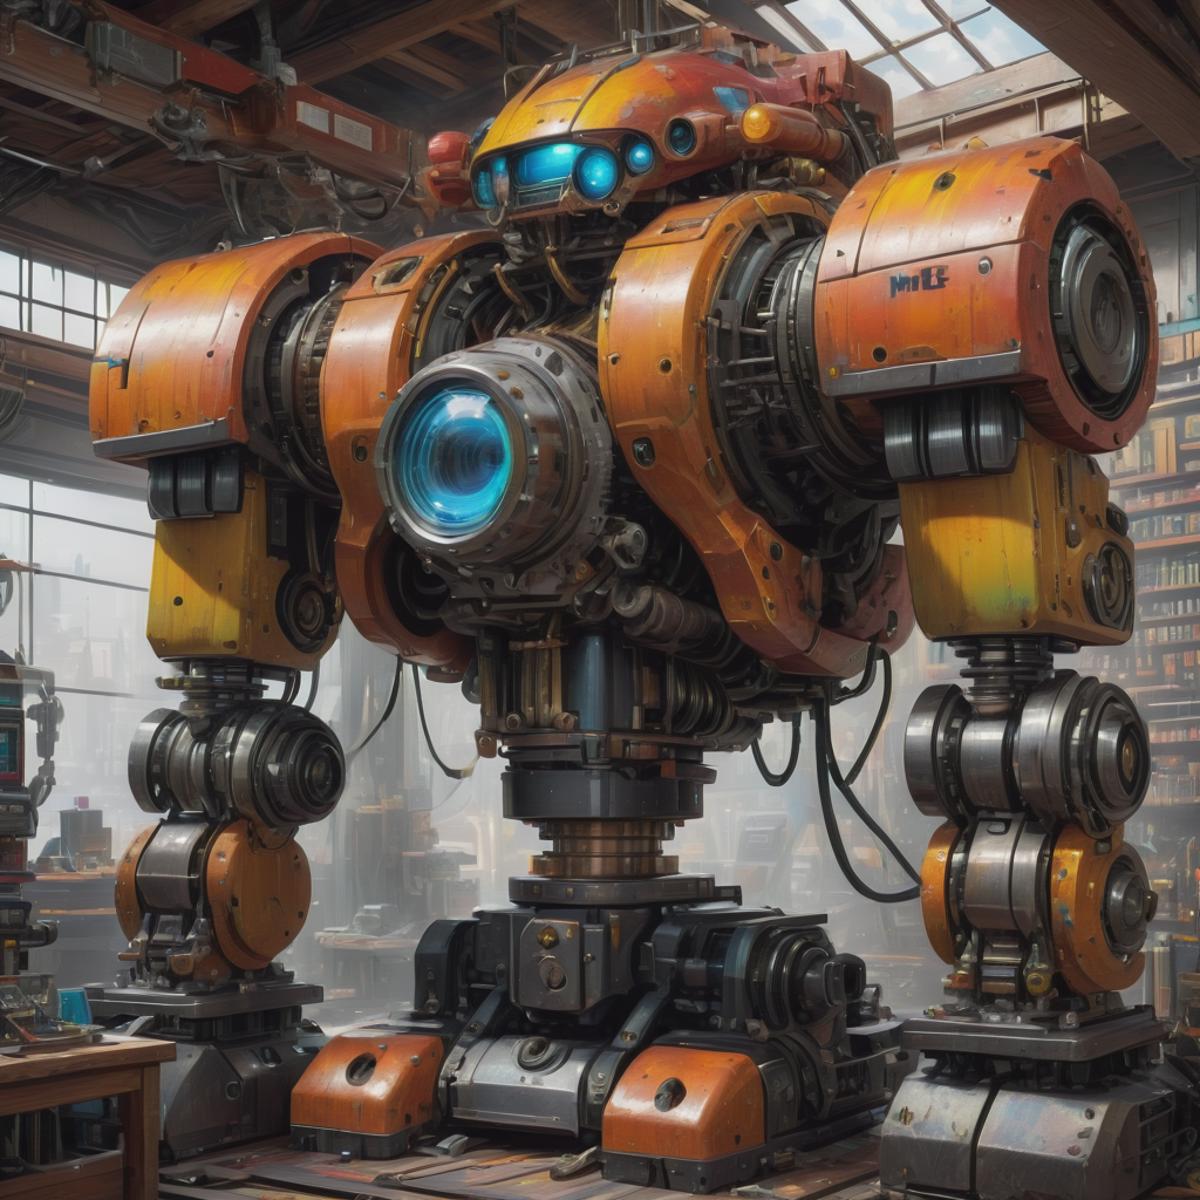 Billions of Machines image by DonMischo